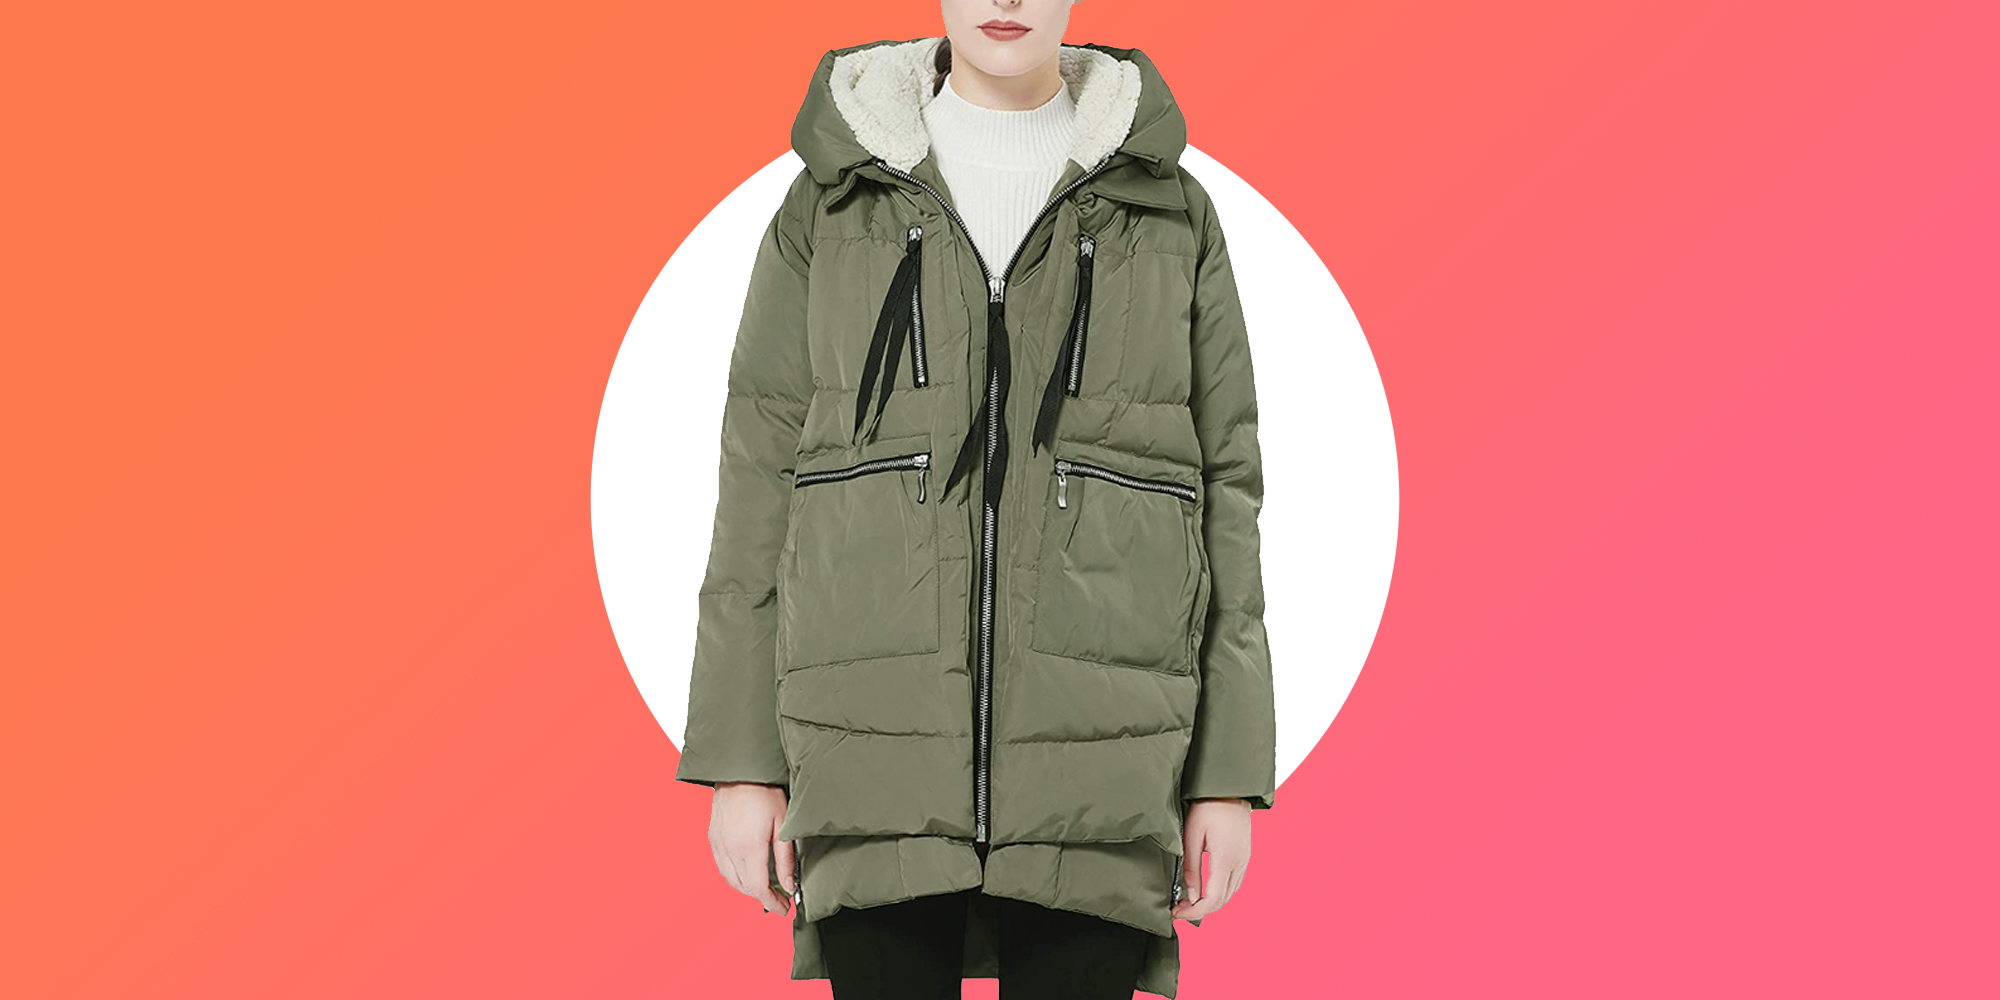 Cold Weather Essentials: Stylist-Approved Winter Jackets — The